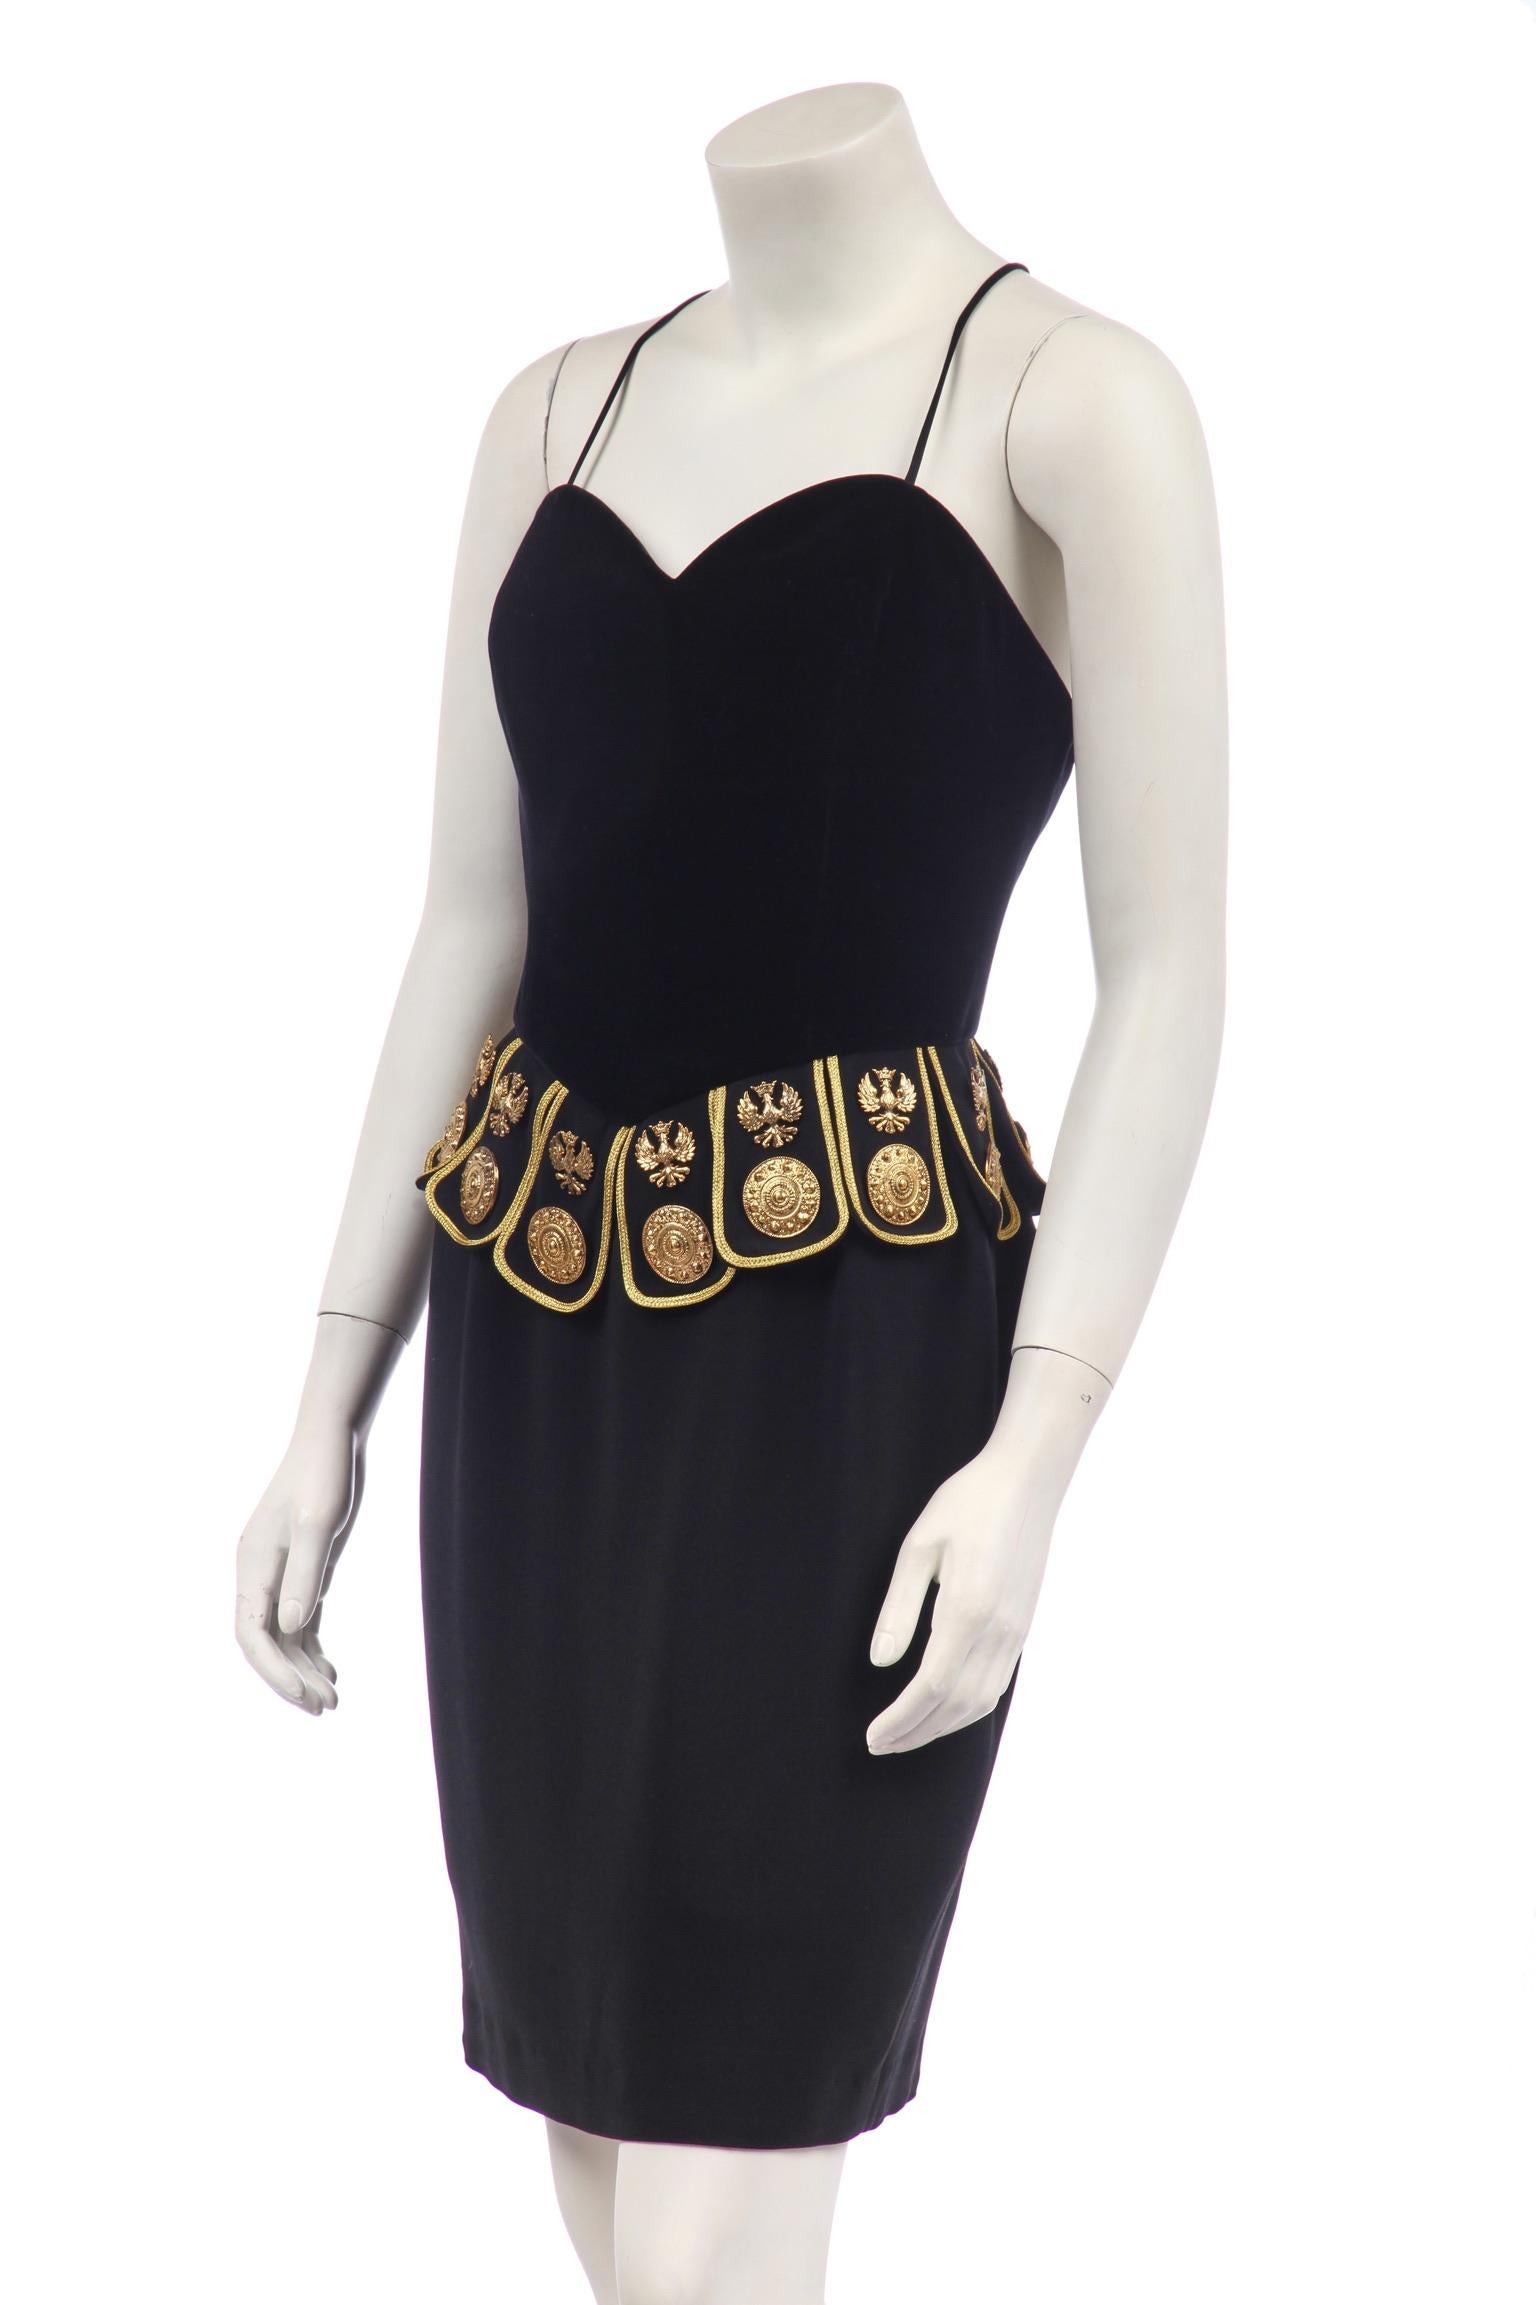 - Moschino Couture
- Gladiator dress
- From the 1989 collection
- Fitted black velvet bodice above black crepe skirt
- Gold edged tabs at the waistline with intricate metal 
  medallions and eagle embellishments
- Mini length
- Italian size 44
-